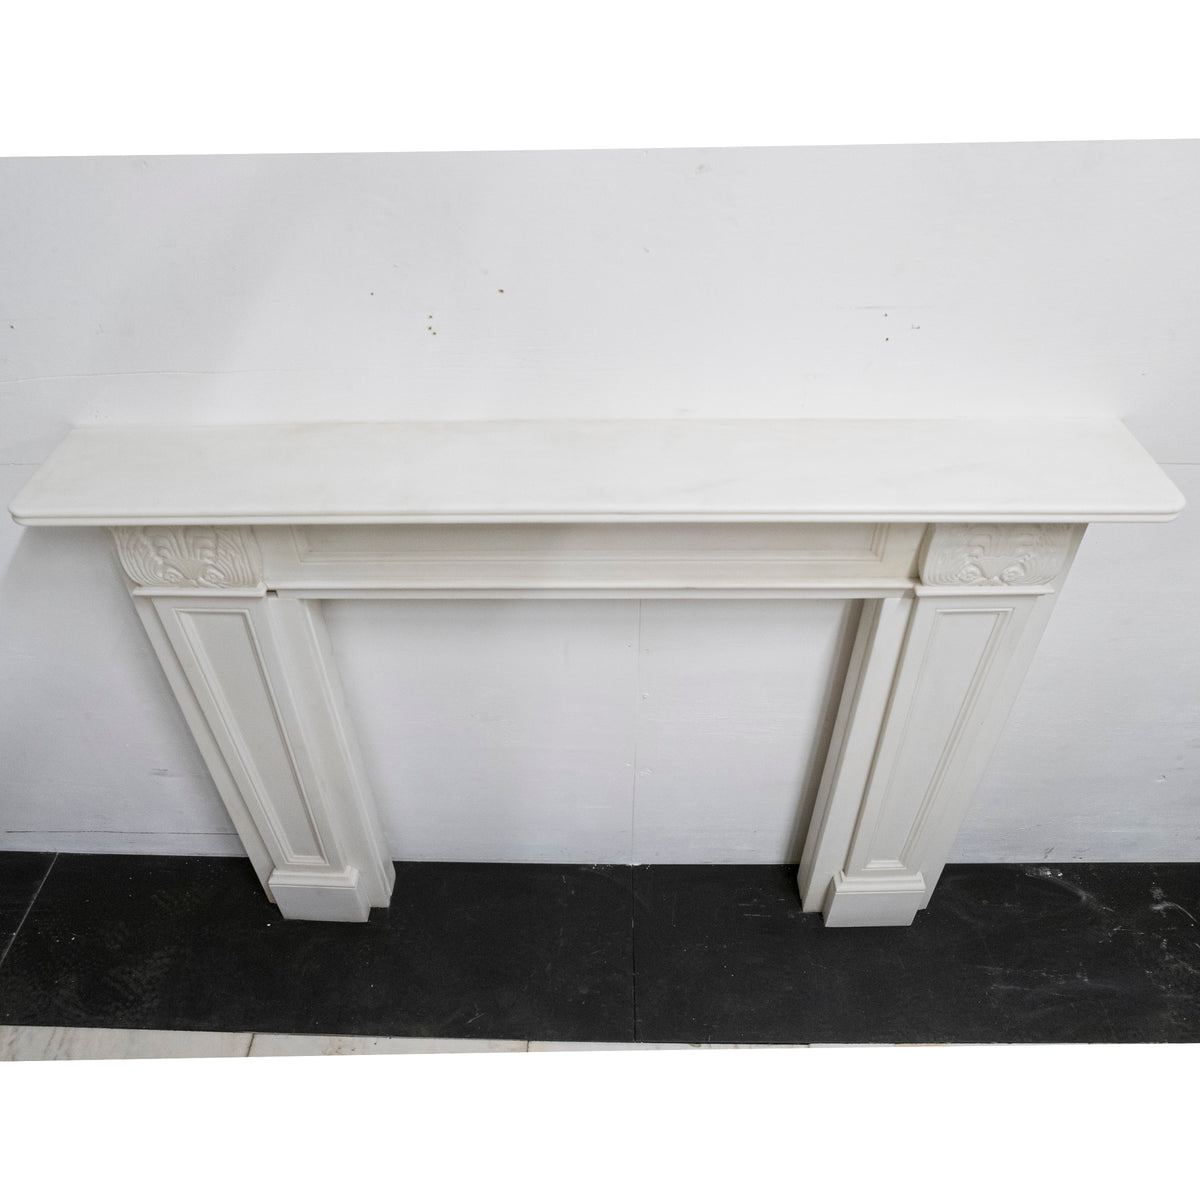 Regency Style Statuary Marble Surround with Acanthus | Pair Available | The Architectural Forum